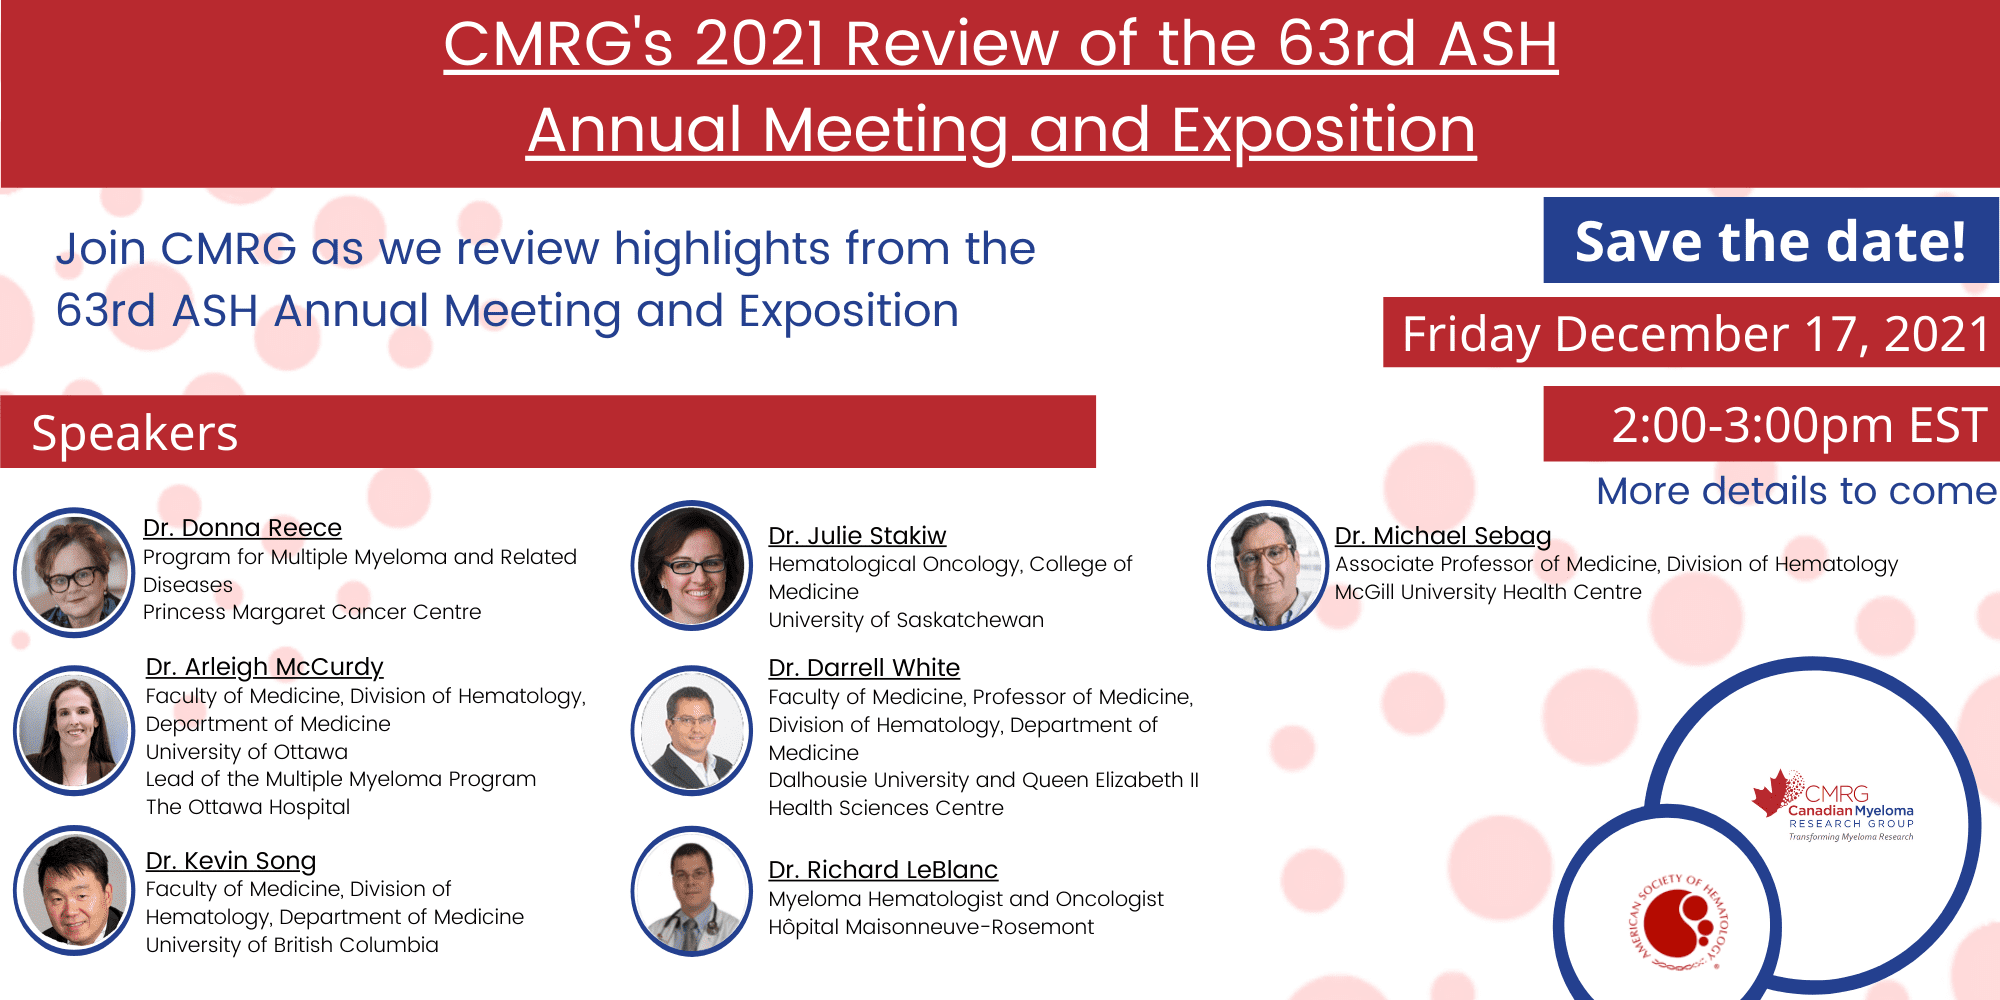 CMRG's Review of the 63rd Annual ASH Meeting and Exposition Canadian